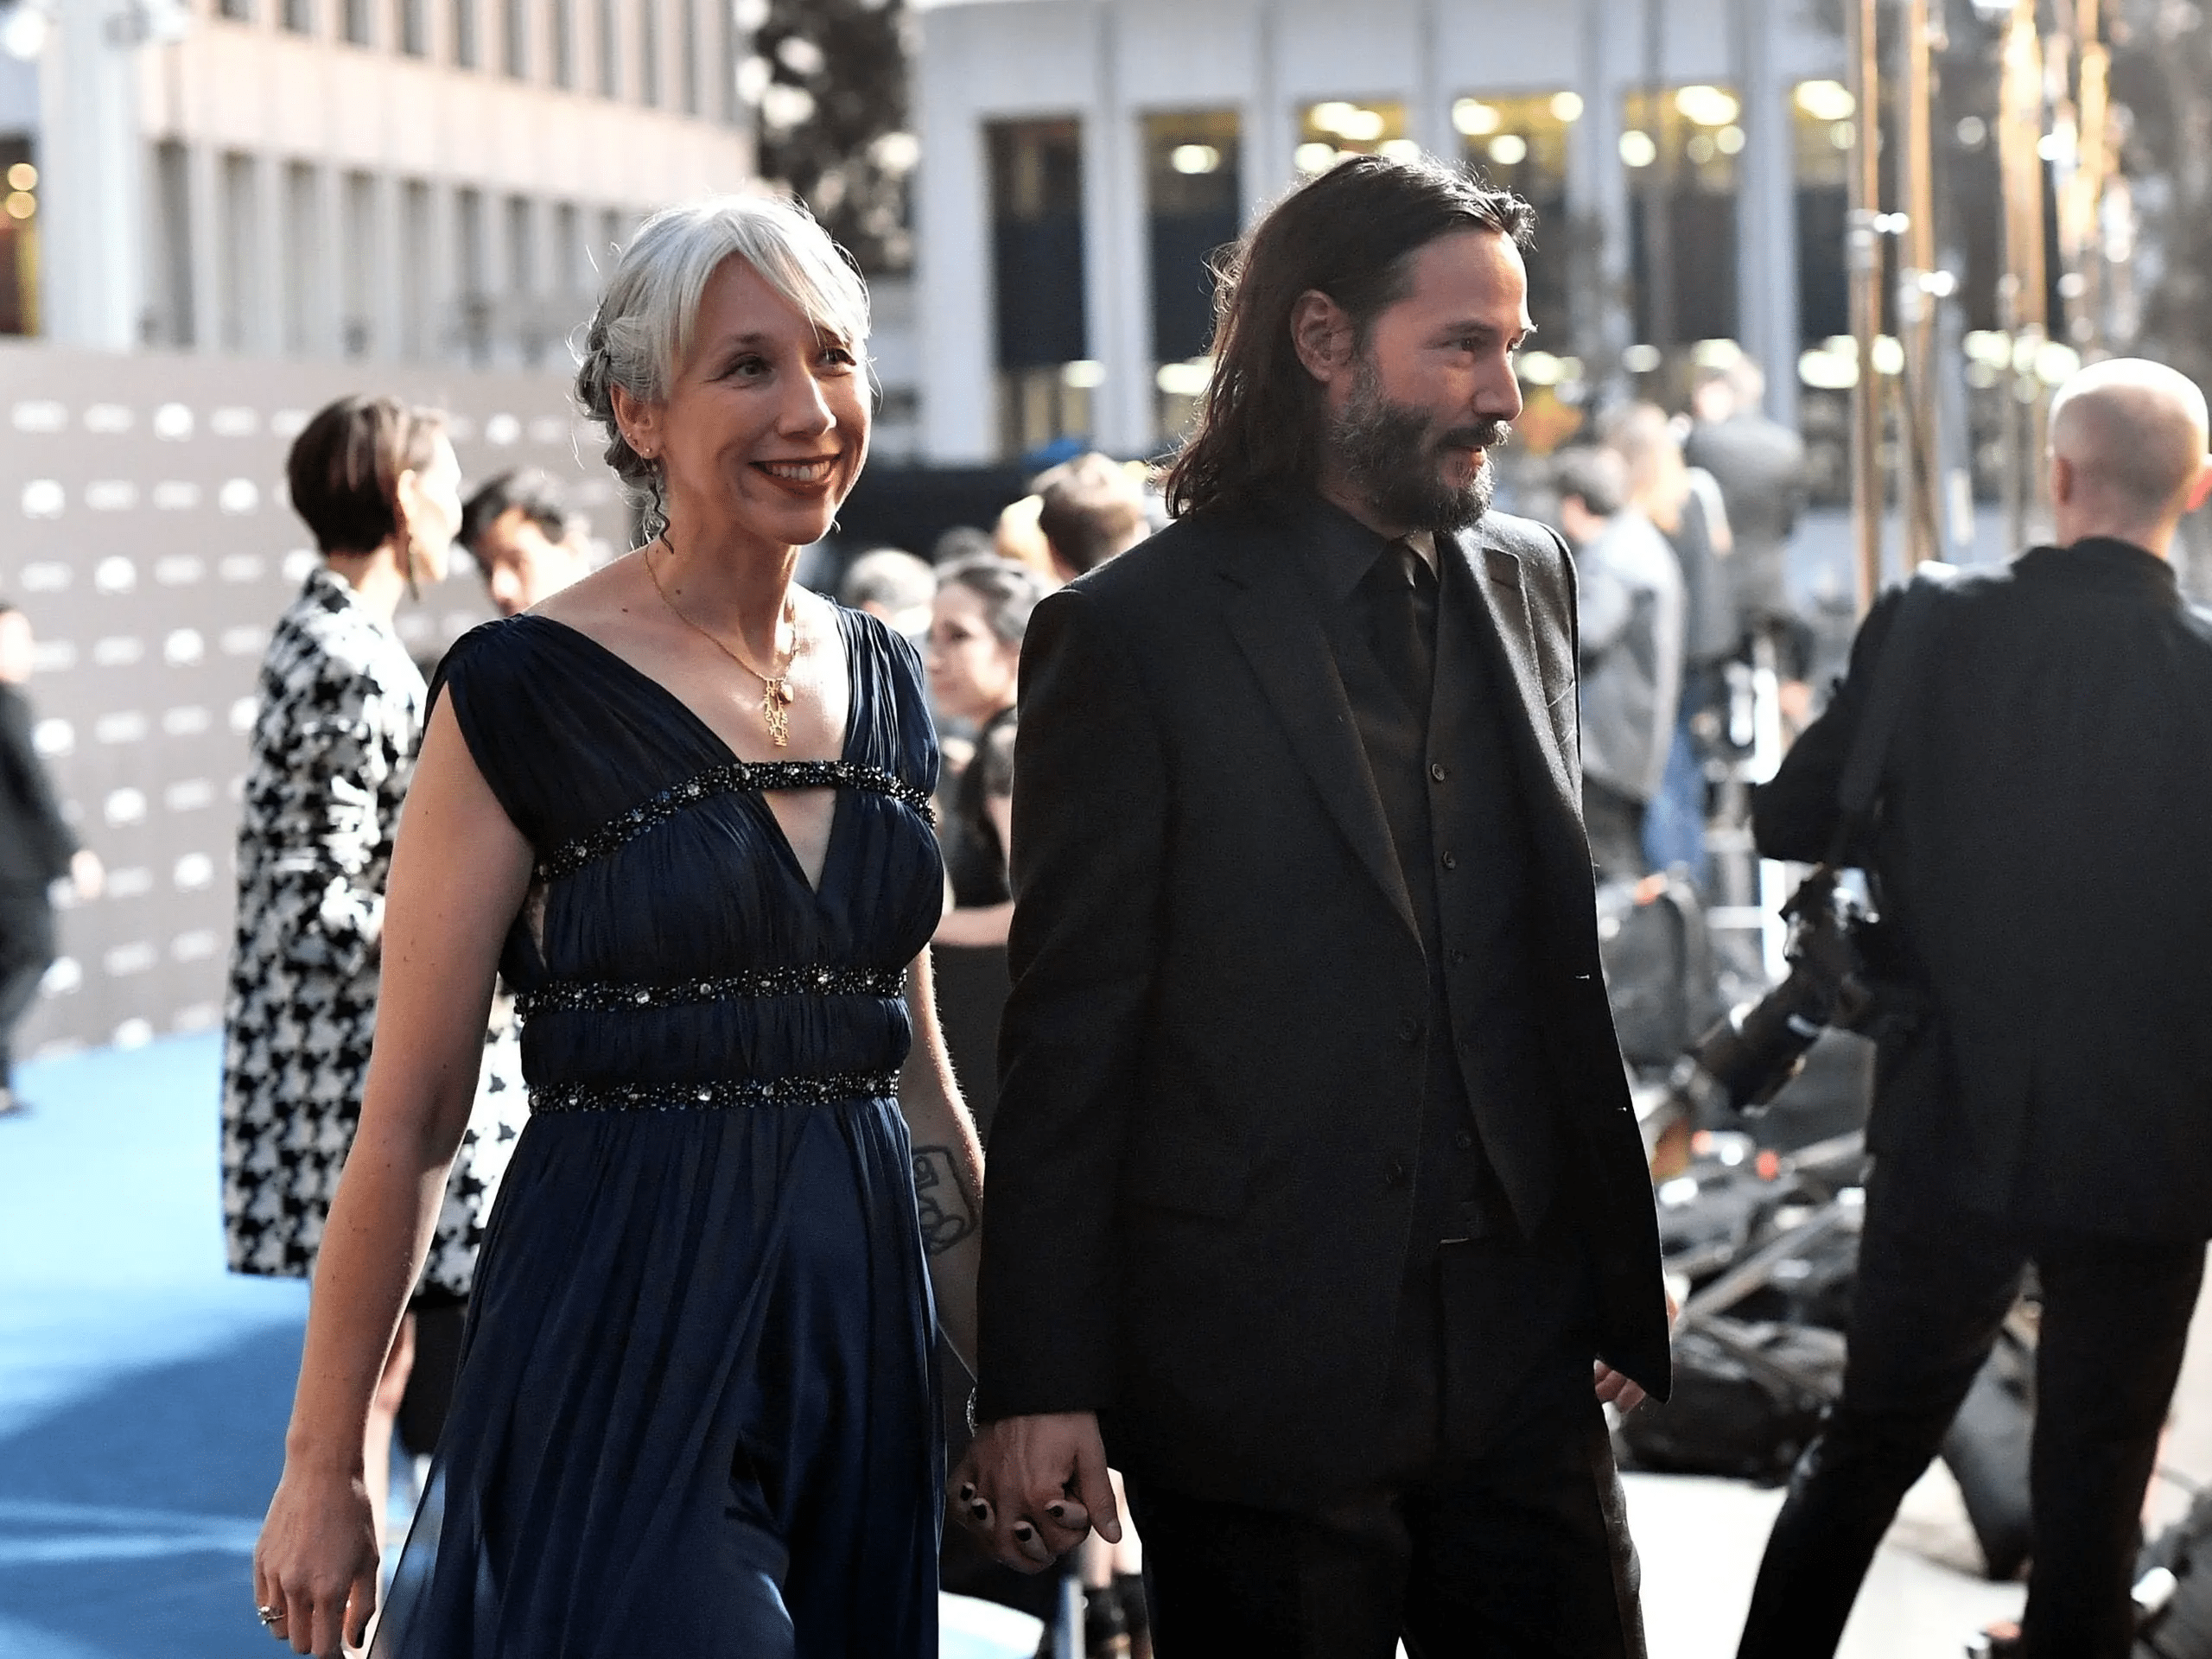 Alexandra Grant Reveals Sweet Details About 'Kind' Boyfriend Keanu Reeves: 'He's Such an Inspiration to Me'